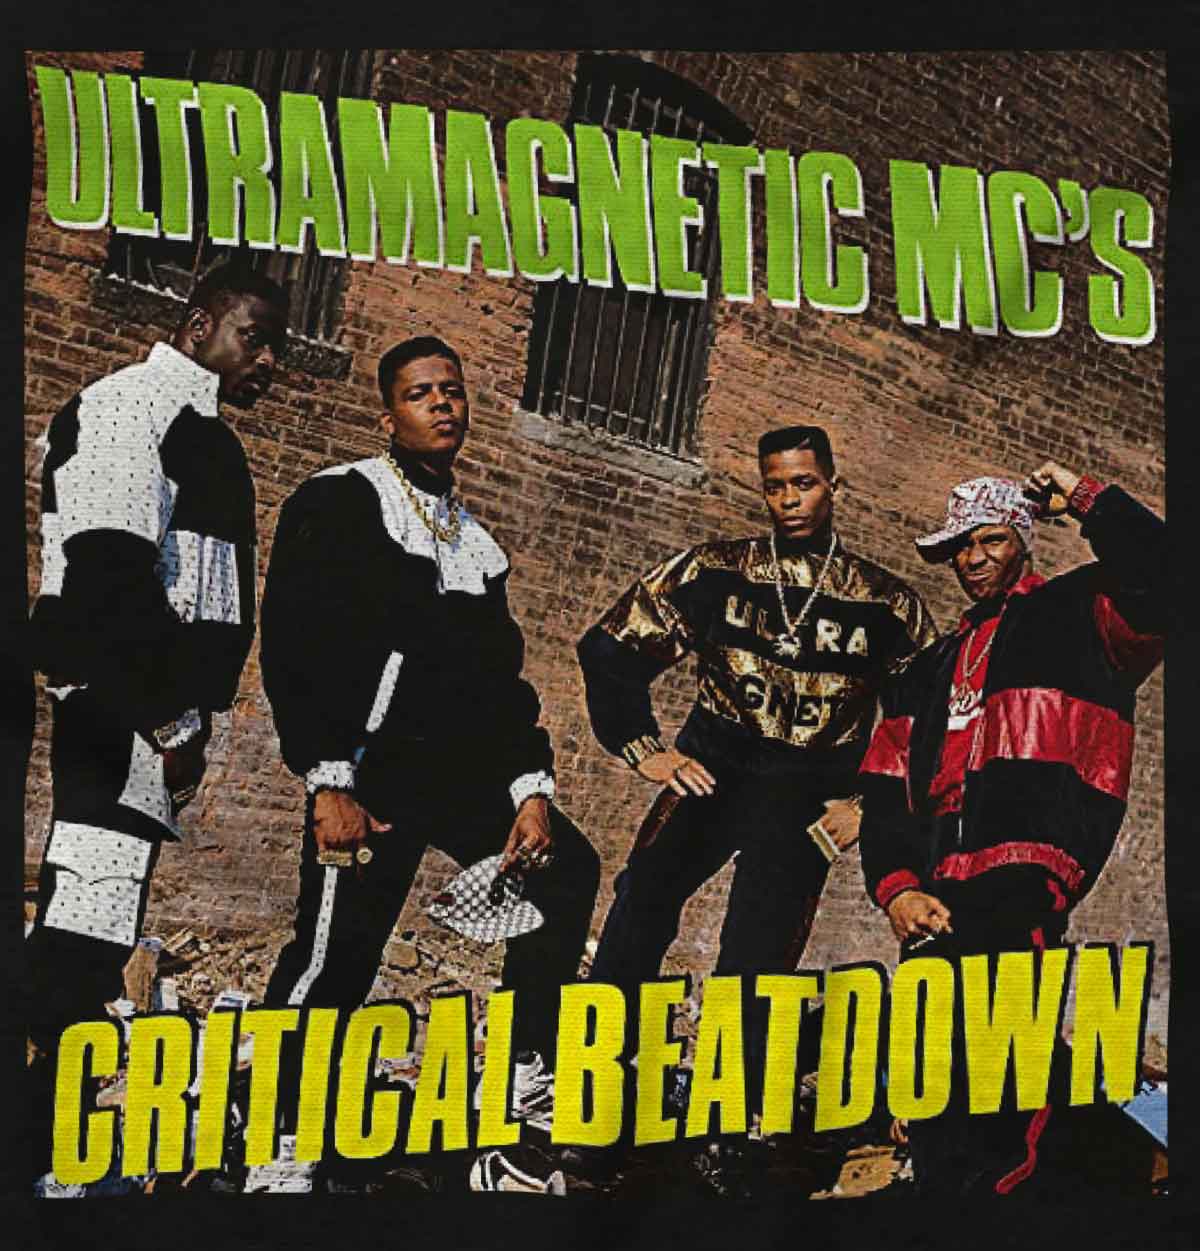 This image is a tribute to the Ultramagnetic MC's, who were influential pioneers in the hip-hop game. It represents the rawness and energy of the 90s hip-hop era, capturing the essence of that time.